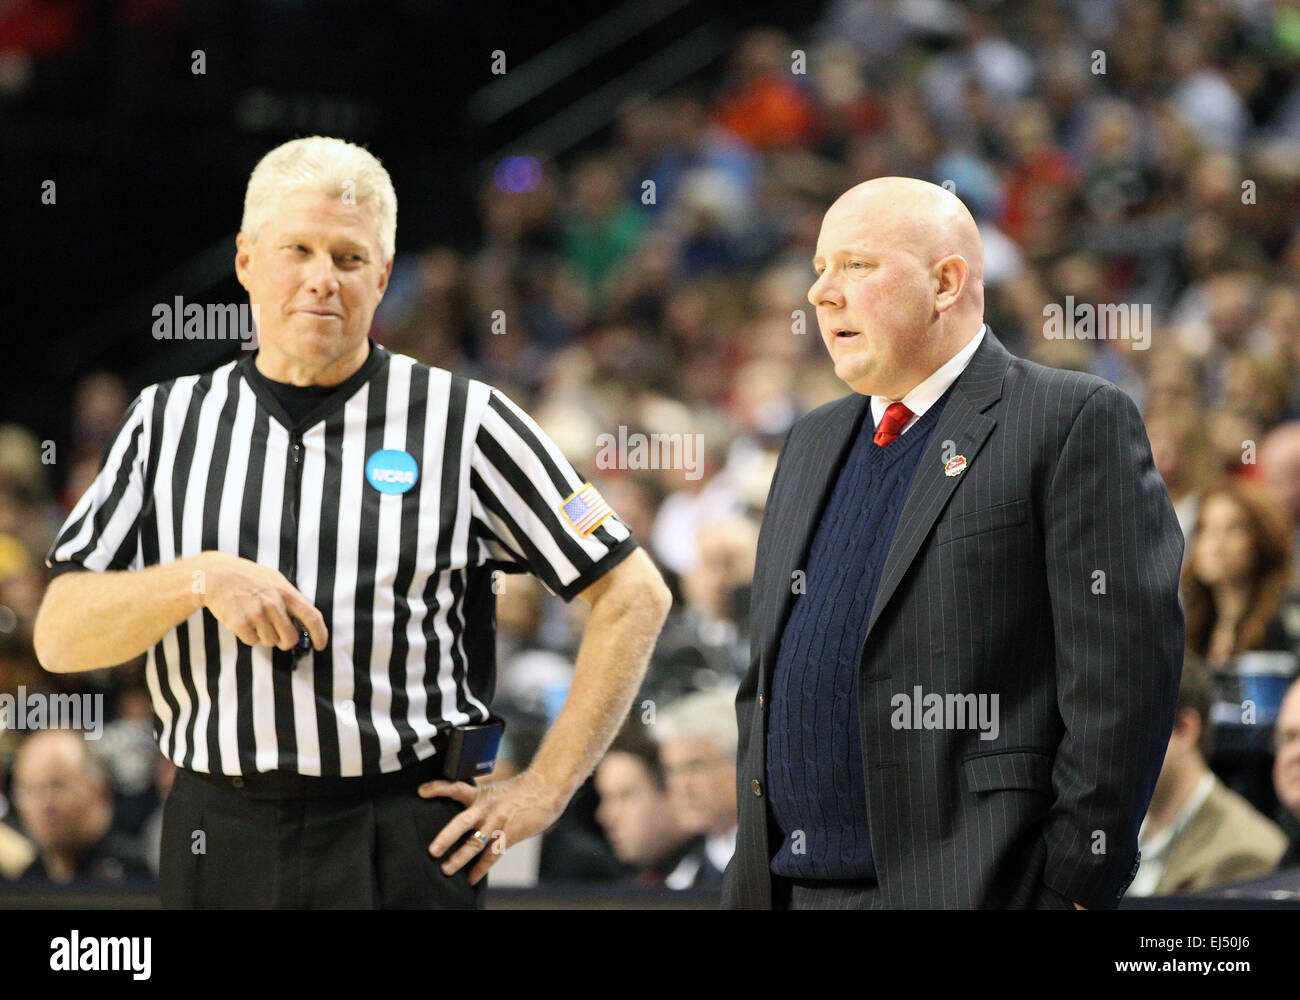 March 19, 2015: Eastern Washington Eagles head coach Jim Hayford discusses some questionable calls during the 2nd round of the 2015 NCAA Men's Basketball Championships at the Moda Center, Portland OR Stock Photo